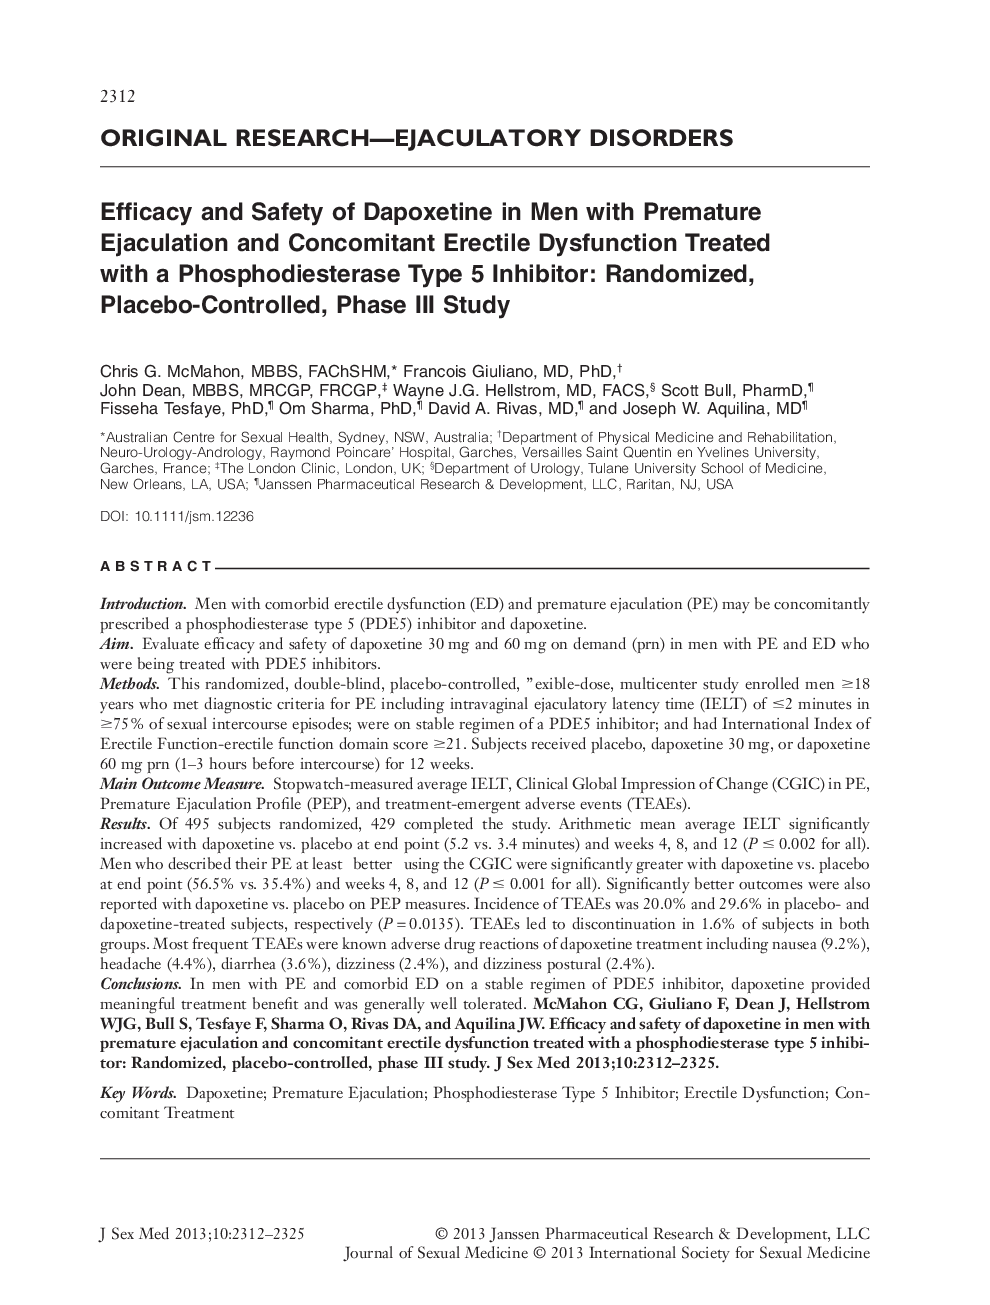 Efficacy and Safety of Dapoxetine in Men with Premature Ejaculation and Concomitant Erectile Dysfunction Treated with a Phosphodiesterase Type 5 Inhibitor: Randomized, Placebo-Controlled, Phase III Study